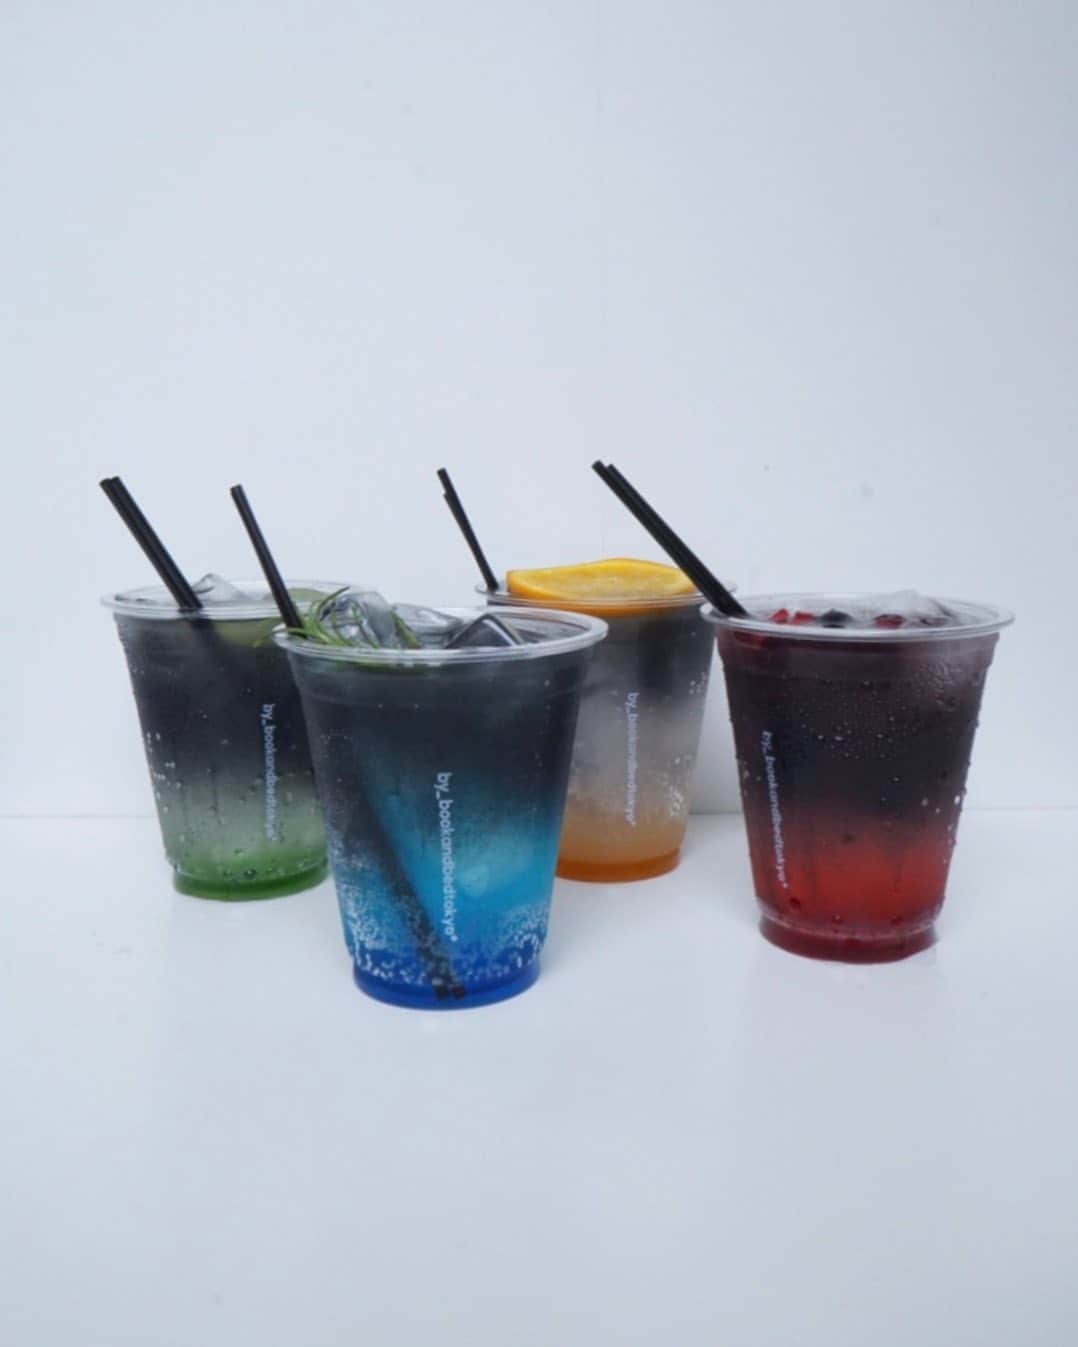 BOOK AND BED TOKYOのインスタグラム：「NEW SUMMER DRINK !!!! 6/21(tue) tomorrow start !!!! ㅤㅤㅤㅤㅤㅤㅤㅤㅤㅤㅤㅤㅤ : BLACK BERRY SODA : BLACK BLUE SODA : BLACK ORANGE SODA : BLACK KIWI SODA ㅤㅤㅤㅤㅤㅤㅤㅤㅤㅤㅤㅤㅤ 涼しい飲み物が増えました。 暑い日が続きますが、今年の夏も BOOK AND BED TOKYO で涼んでください！ ㅤㅤㅤㅤㅤㅤㅤㅤㅤㅤㅤㅤㅤ ㅤㅤㅤㅤㅤㅤㅤㅤㅤㅤㅤㅤㅤ #bookandbedtokyo  #bookandbedtokyoshinjuku  #bookandbedtokyoshinsaibashi」